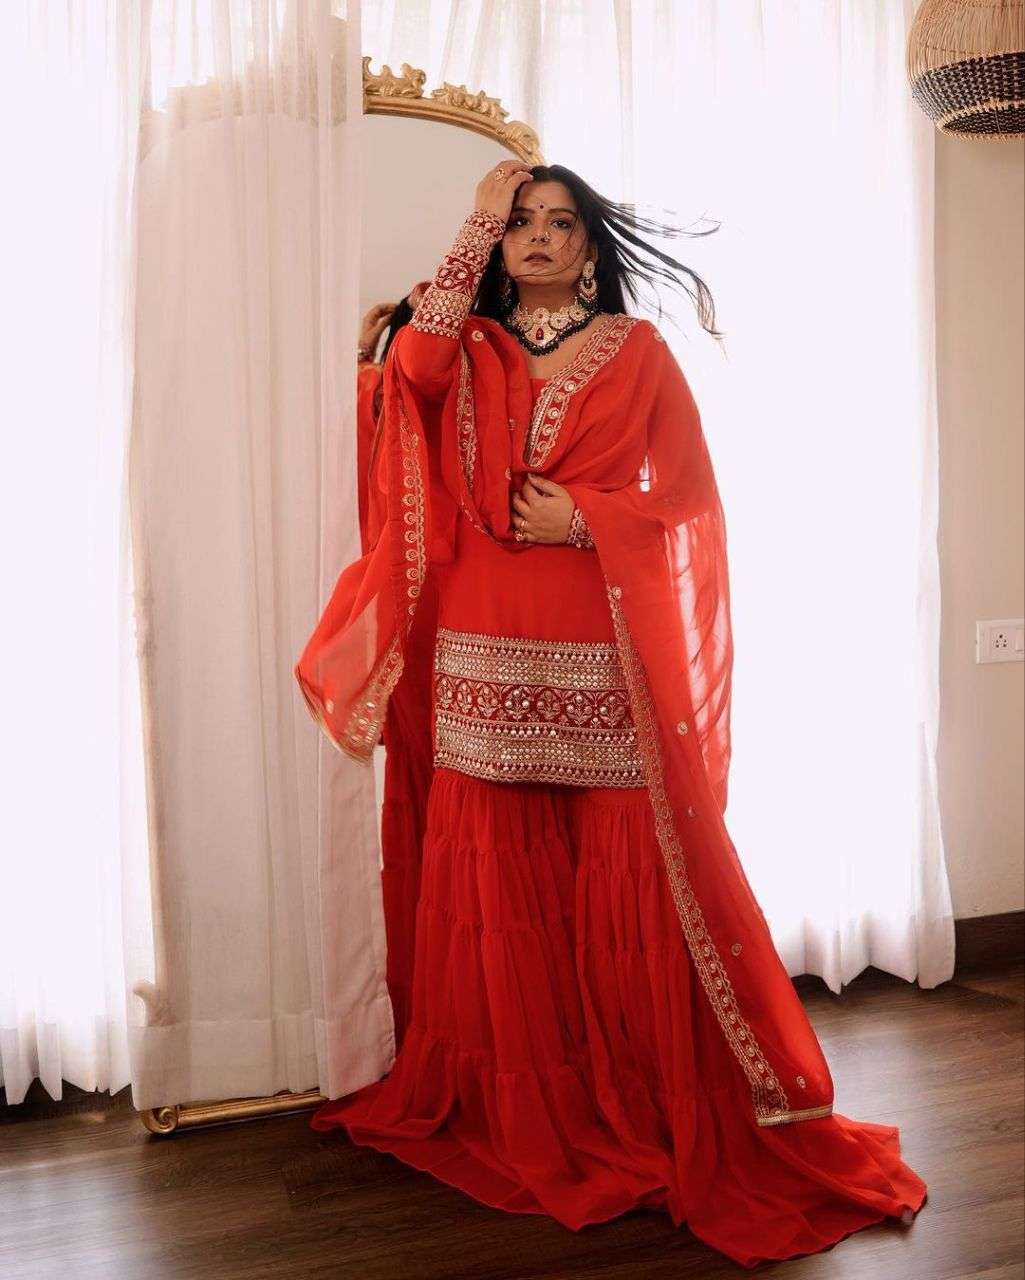 940 red scarlet sharara if you are looking for an outfit to be worn during a festival or to a wedding and celebrations with your loved ones, then our georgette sharara set